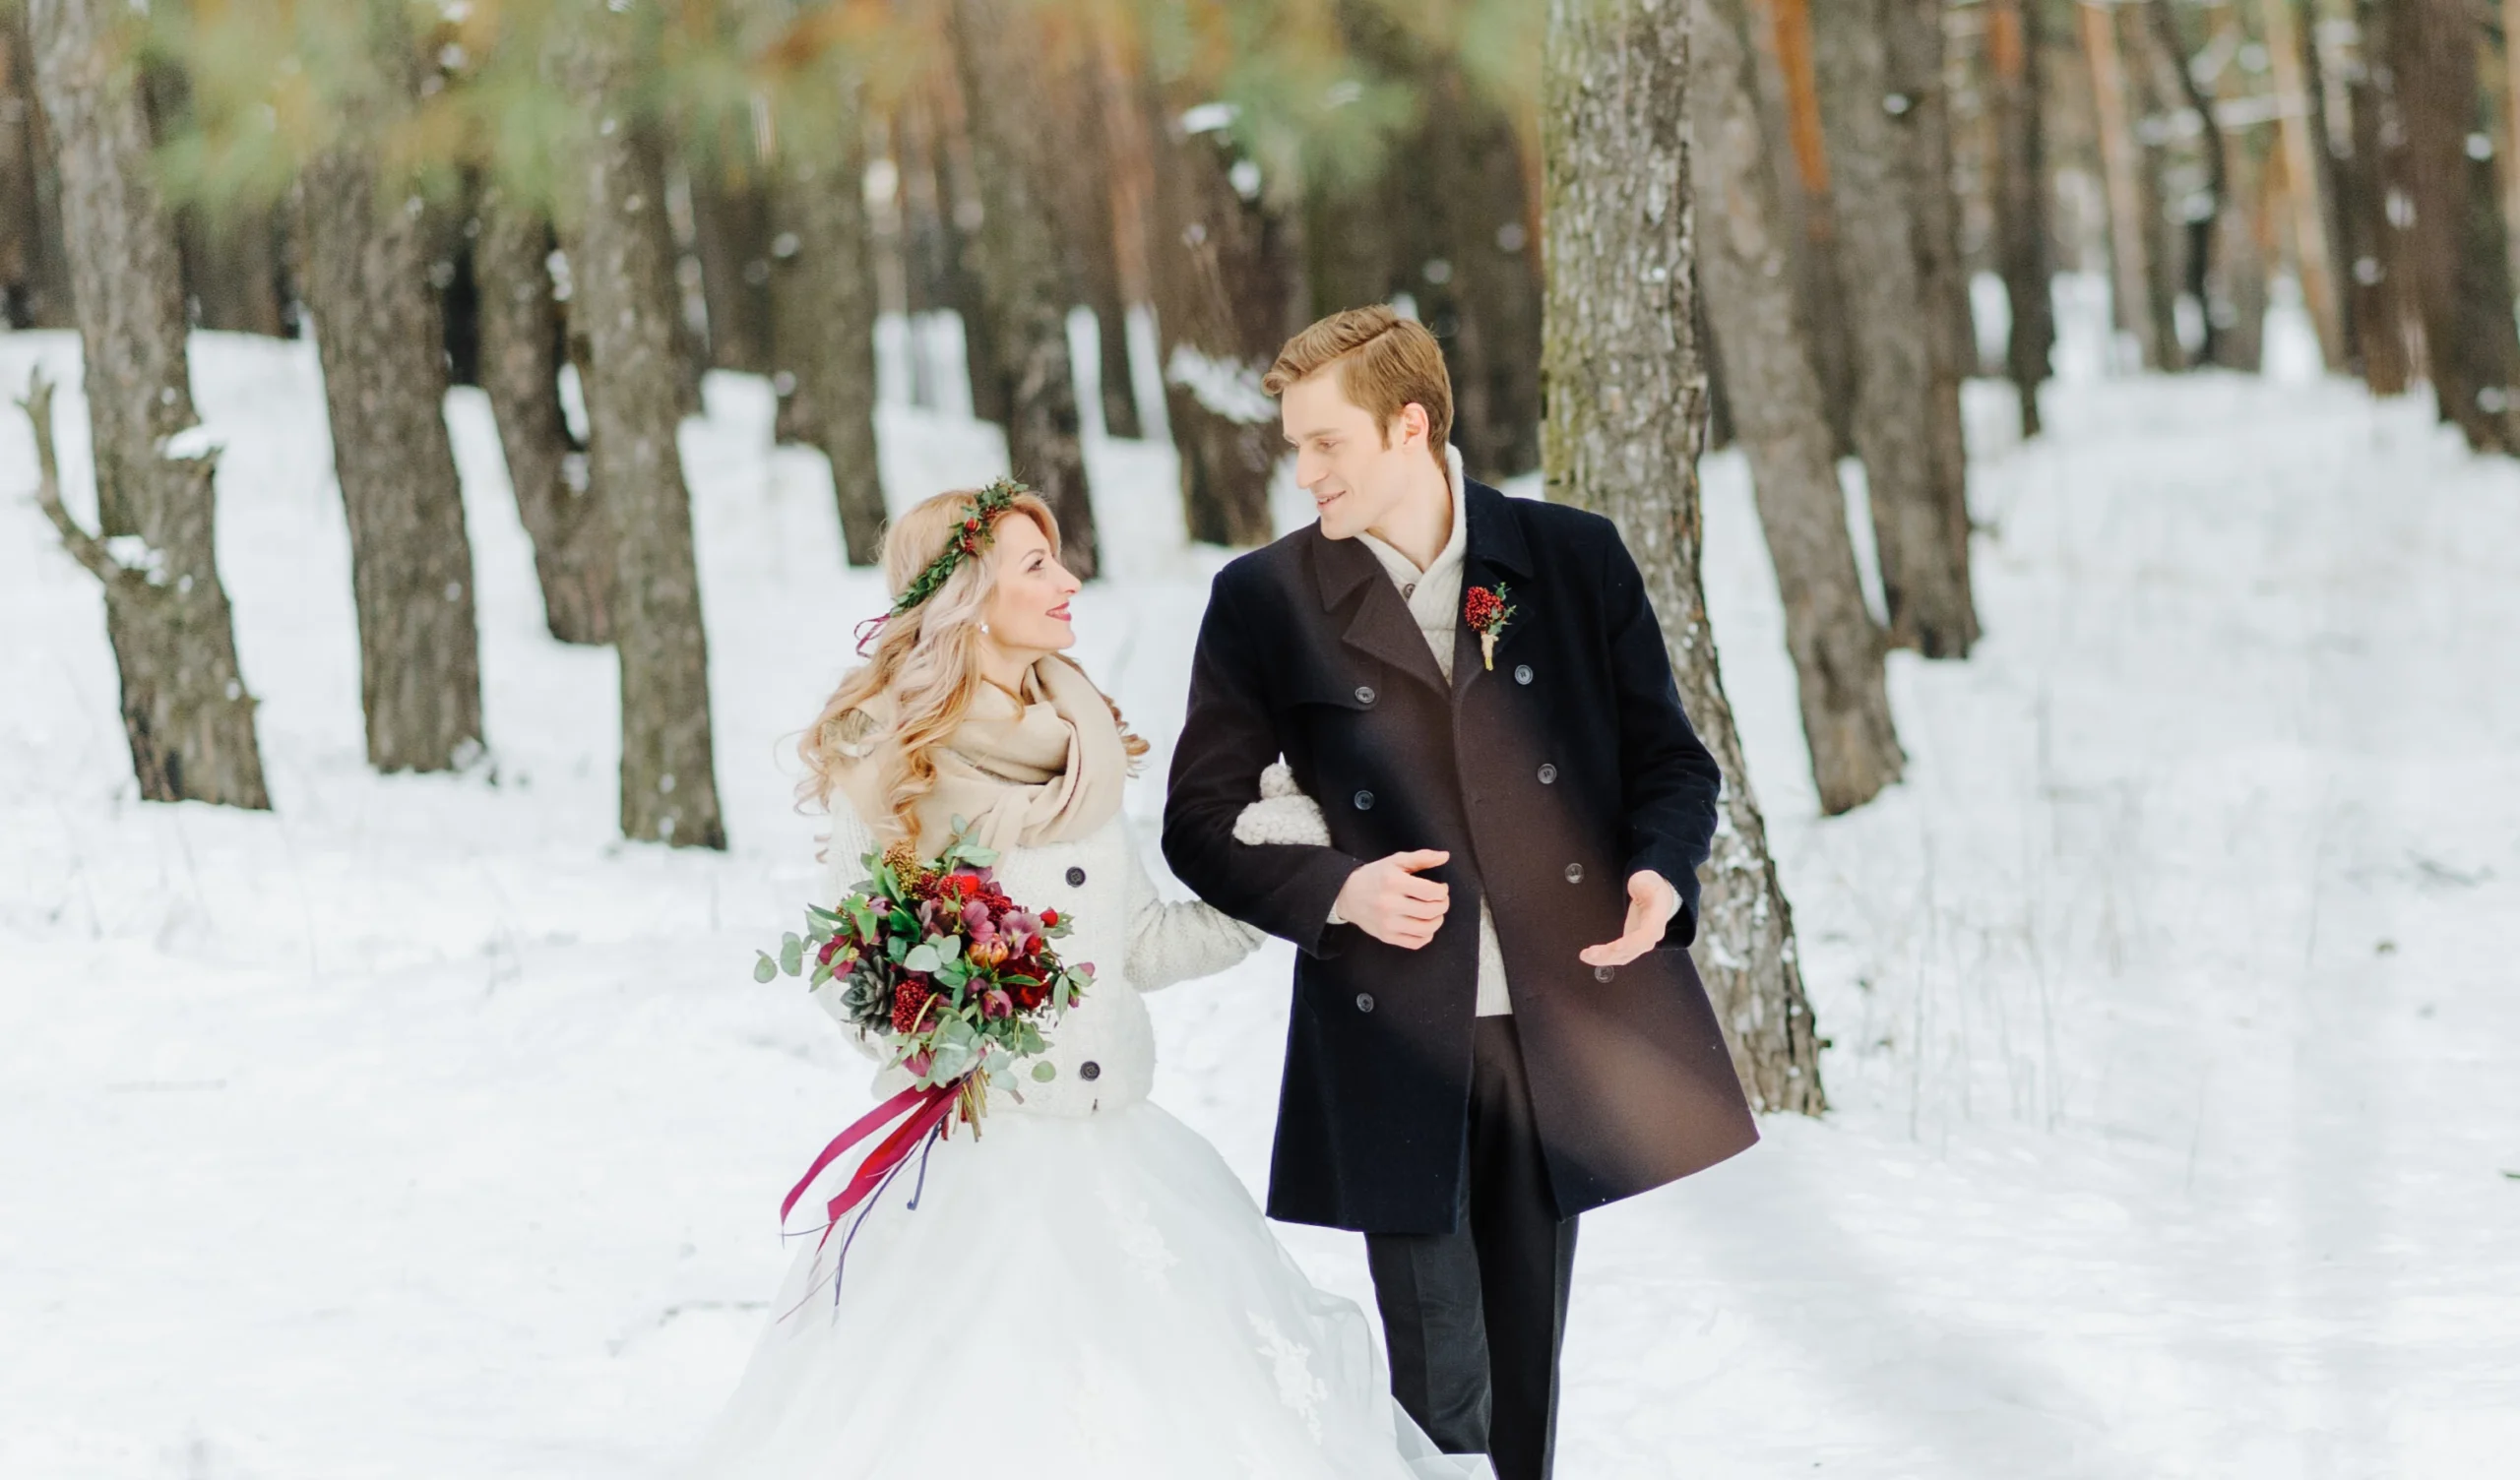 Embracing the Seasons: Best Season To Have A Wedding